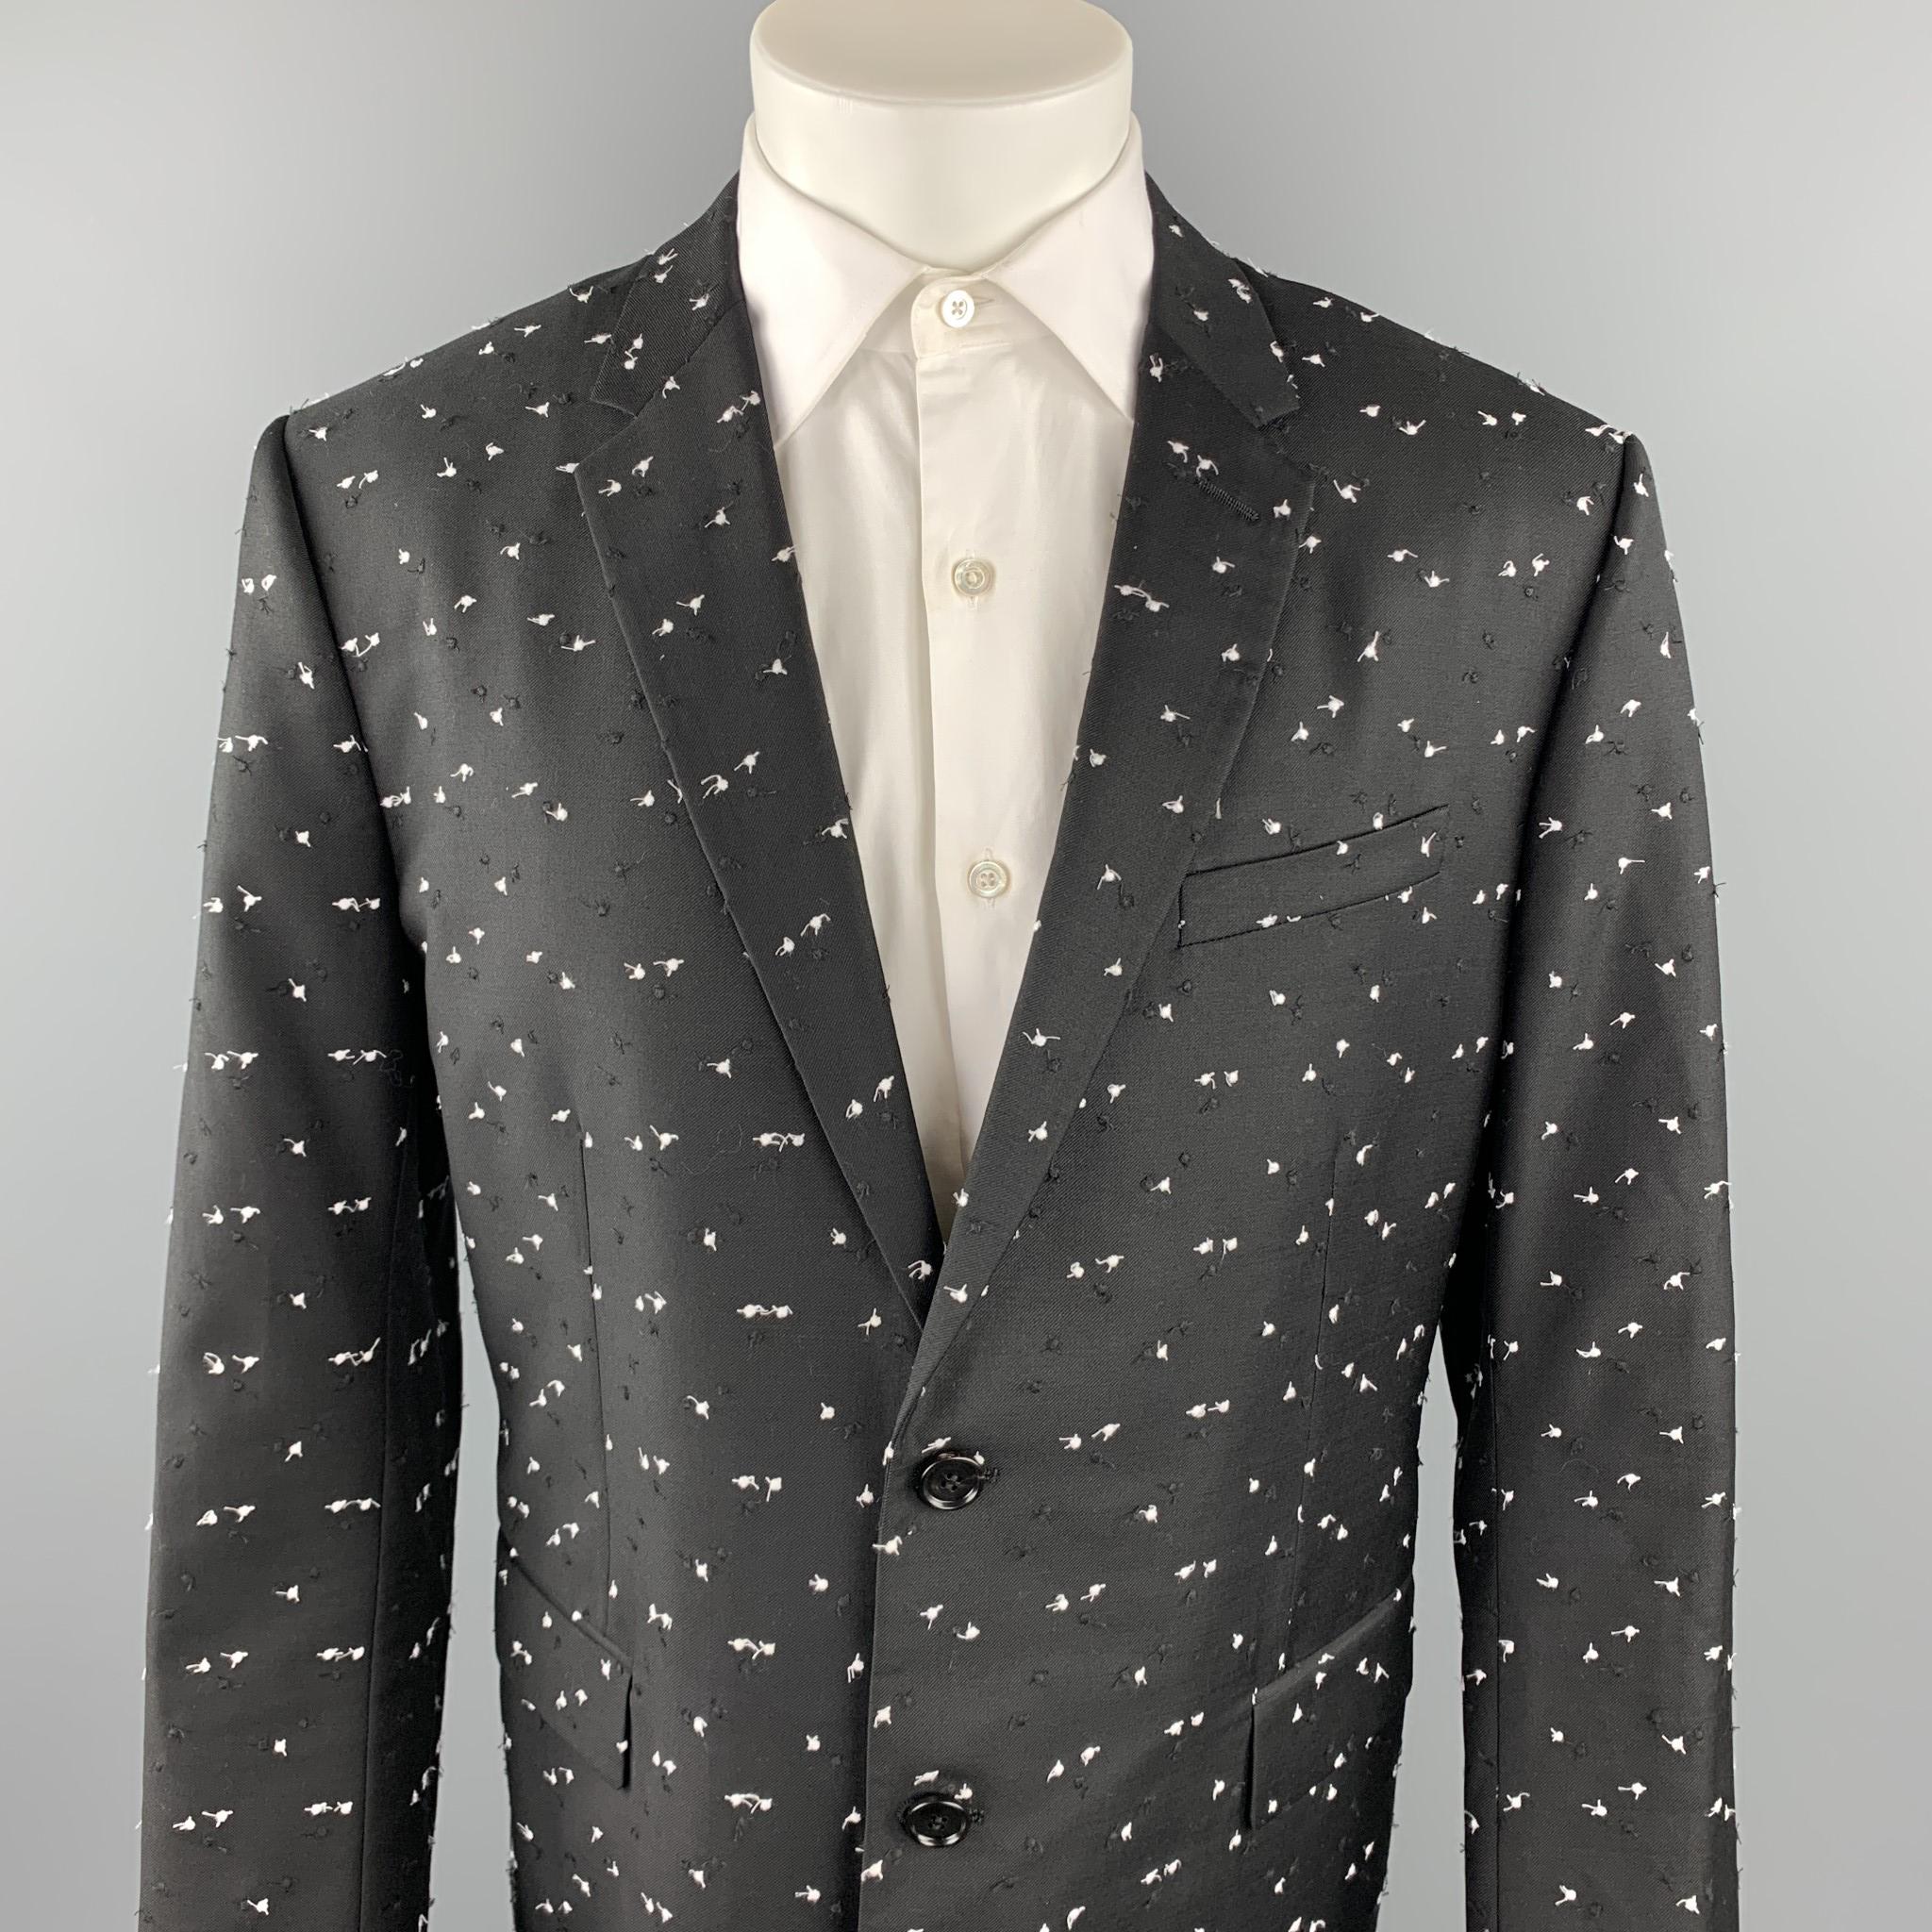 DIOR HOMME Pre-Fall 2017 sport coat comes in a black & white textured wool featuring a notch lapel, flap pockets, and a two button closure. Made in Italy.

Excellent Pre-Owned Condition.
Marked: IT 56

Measurements:

Shoulder: 19 in. 
Chest: 44